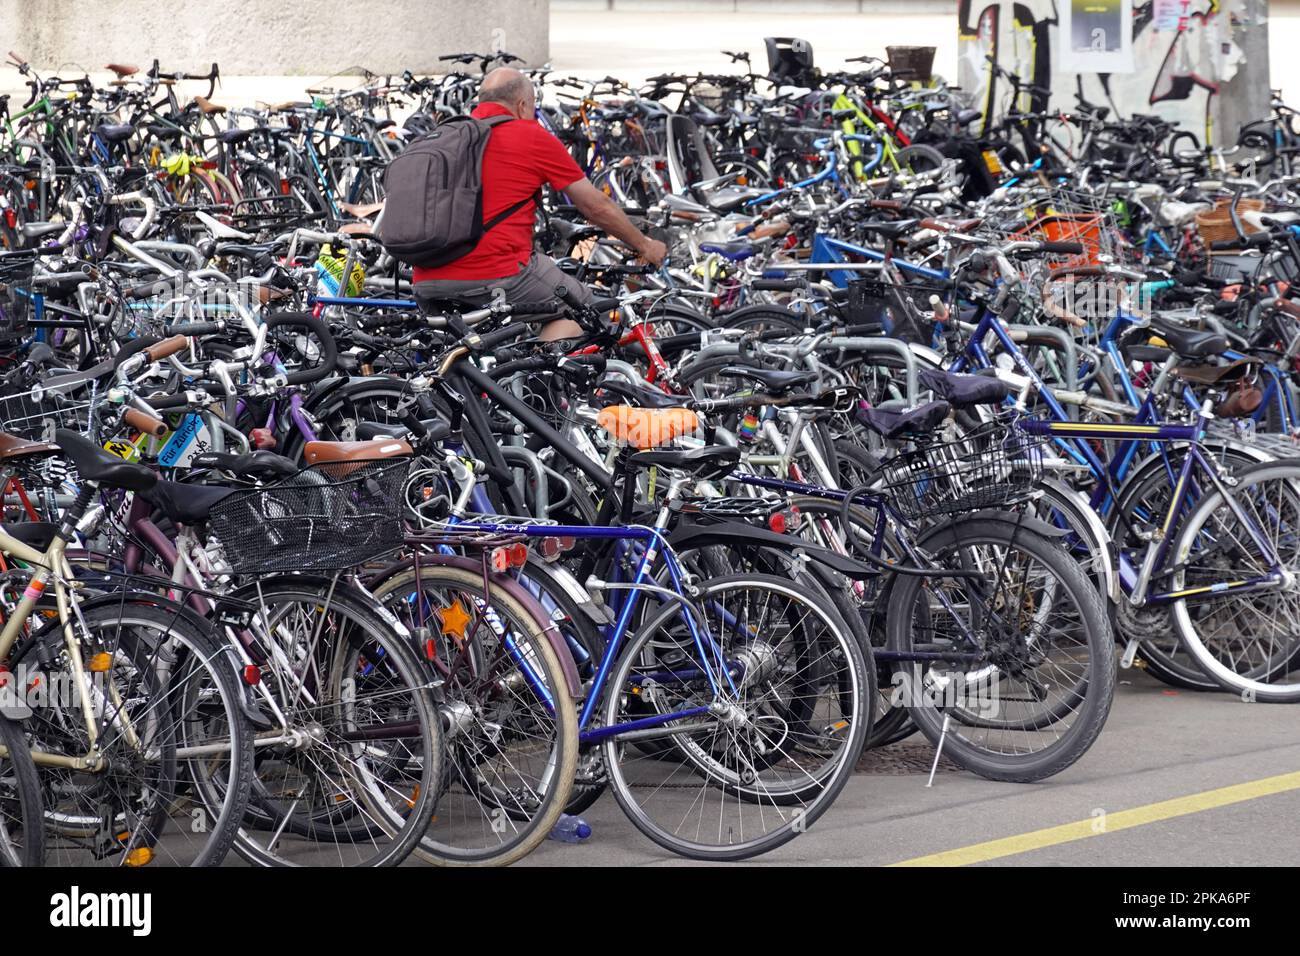 19.05.2022, Switzerland, Canton of Zurich, Zuerich - Man driving over a full bicycle car park. 00S220519D153CAROEX.JPG [MODEL RELEASE: NO, PROPERTY RE Stock Photo